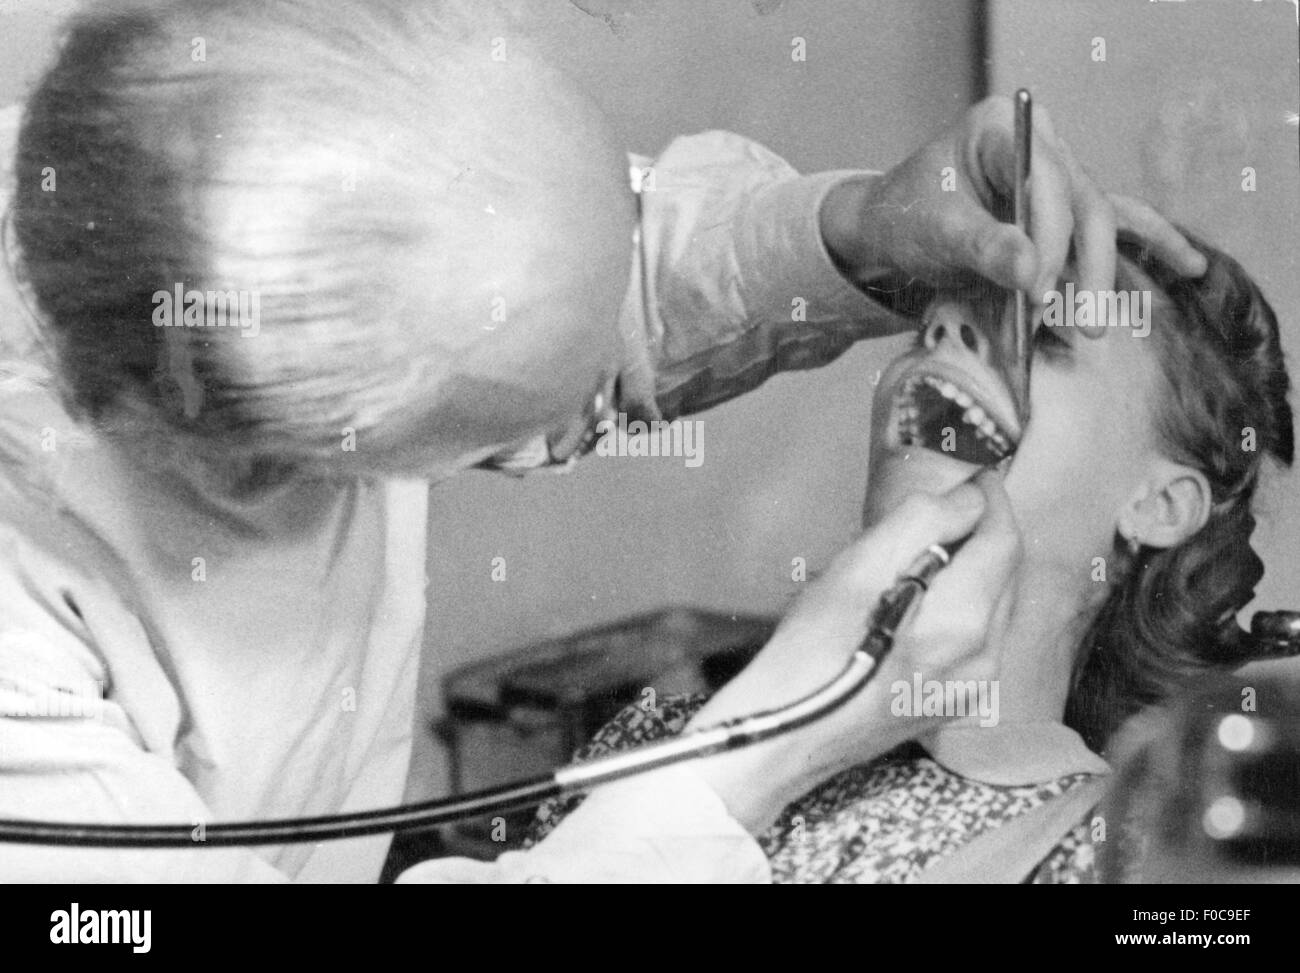 medicine, dentistry, treatment in a school dental clinic, 1947, Additional-Rights-Clearences-Not Available Stock Photo